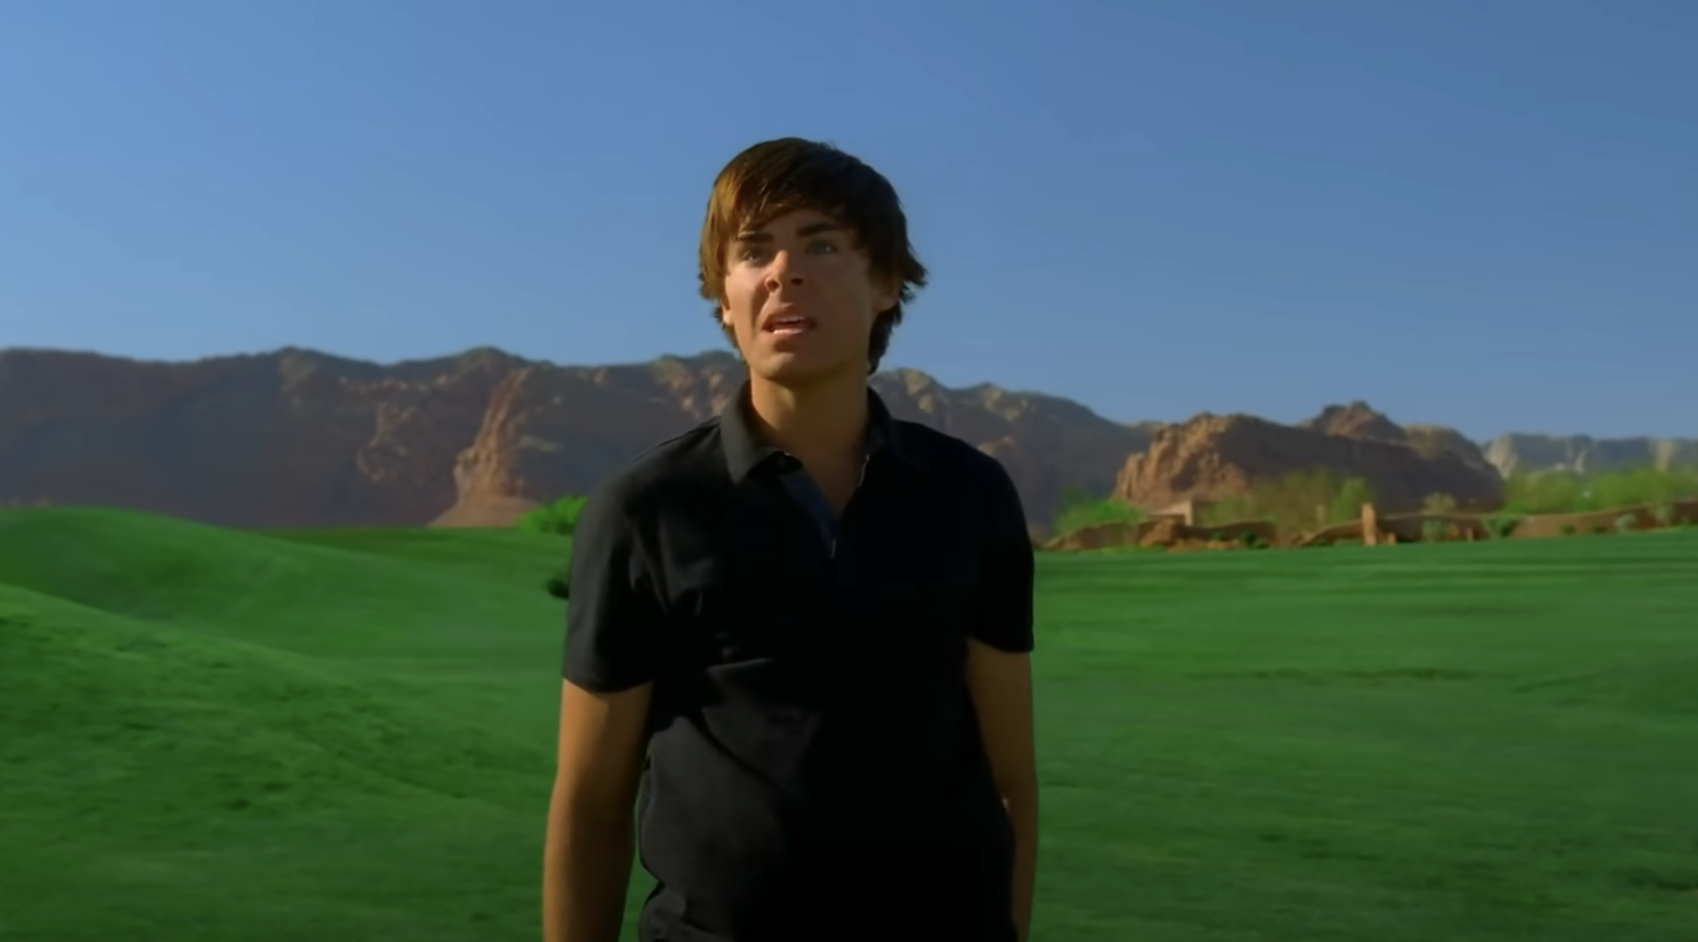 Zac Efron on a golf course with confusion on his face, mountains in the background